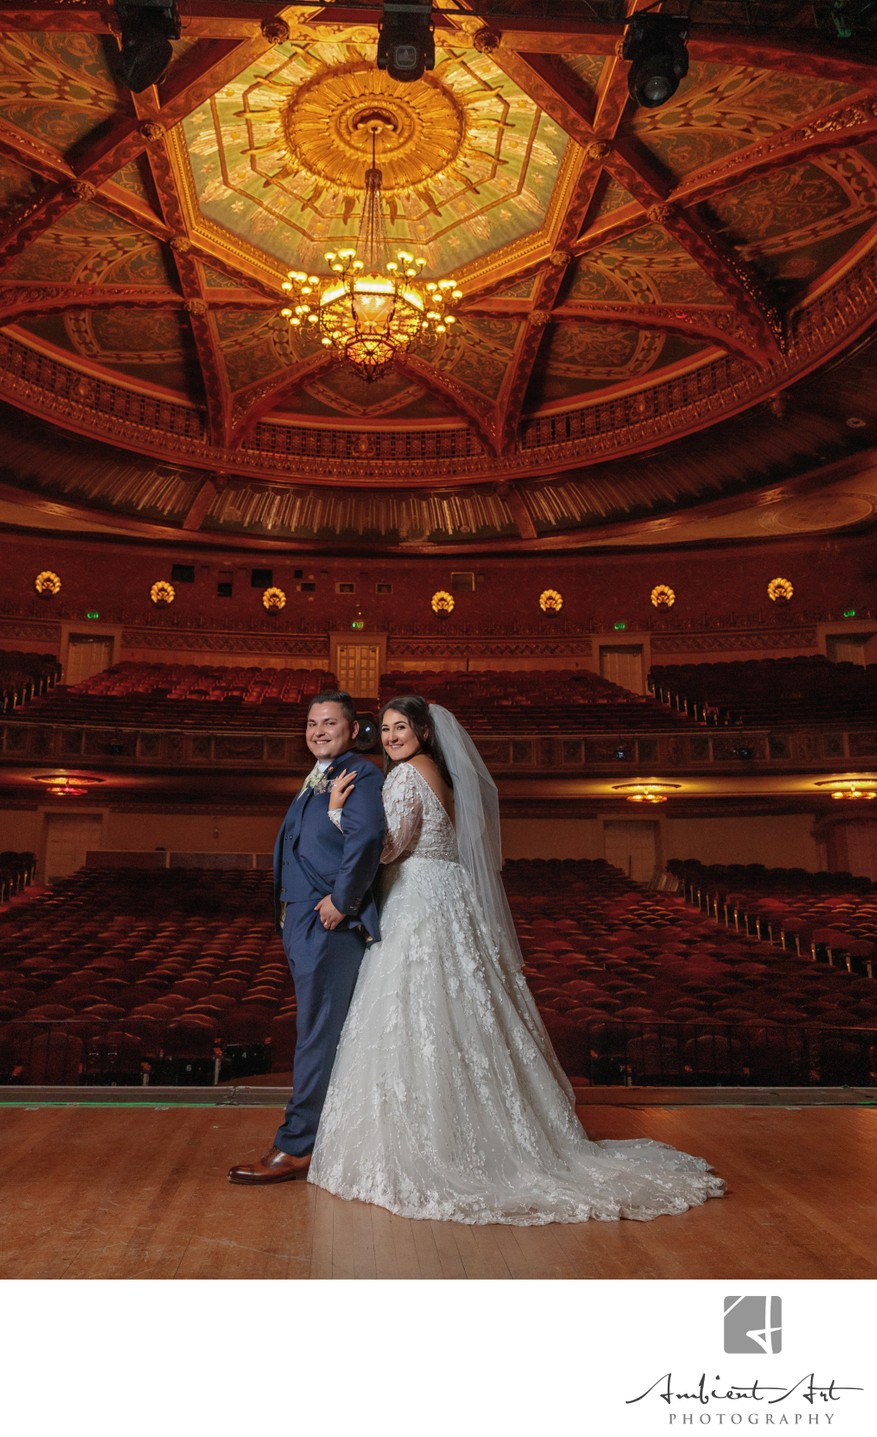 Wedding photo at the Warnor's Theater Fresno, CA 